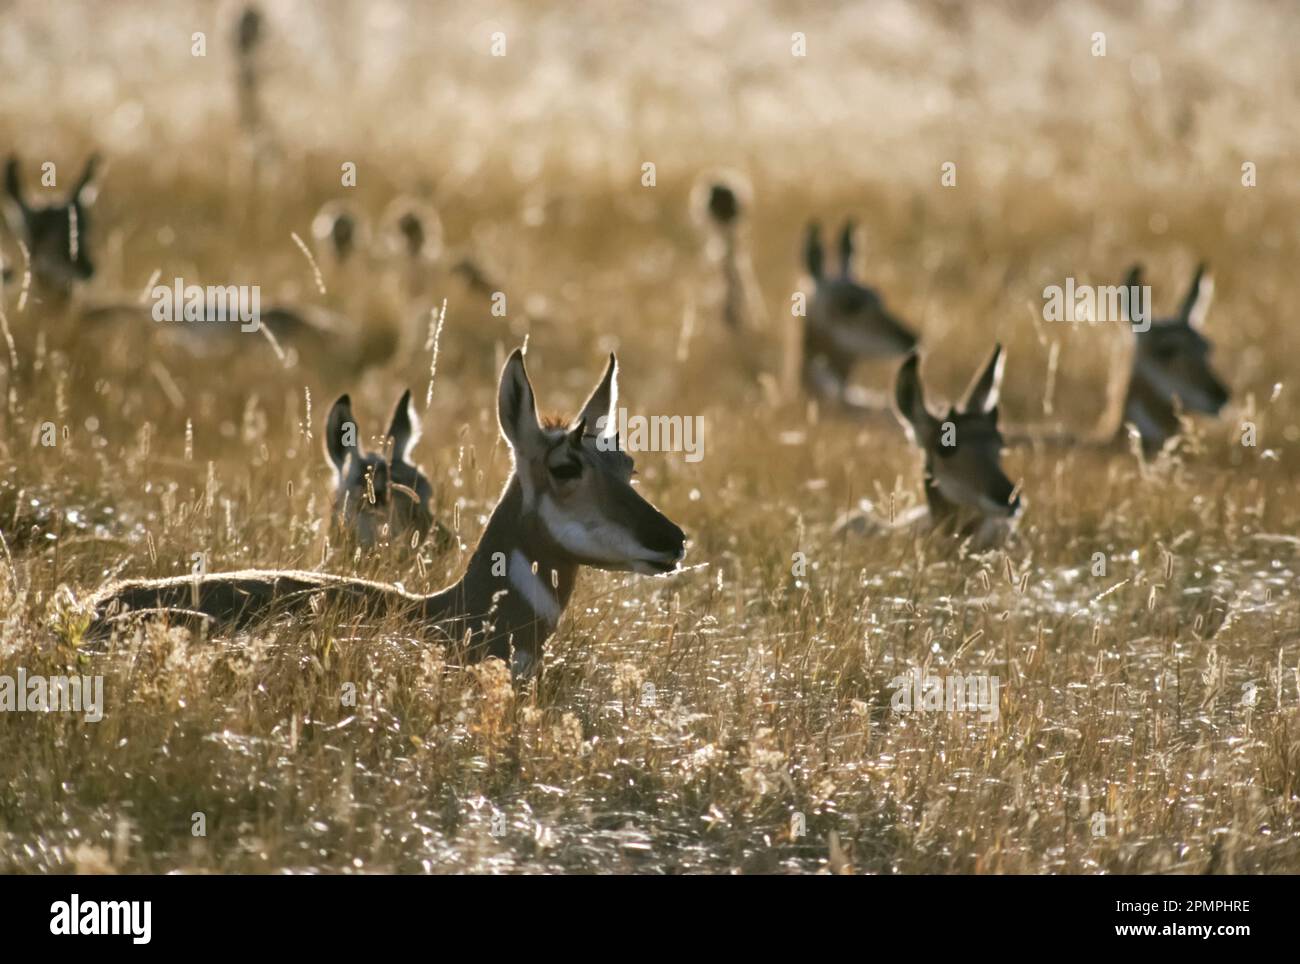 Herd of Pronghorn antelope (Antilocapra americana) at rest in a grassy field, Lamar Valley, Yellowstone National Park, Wyoming, USA Stock Photo